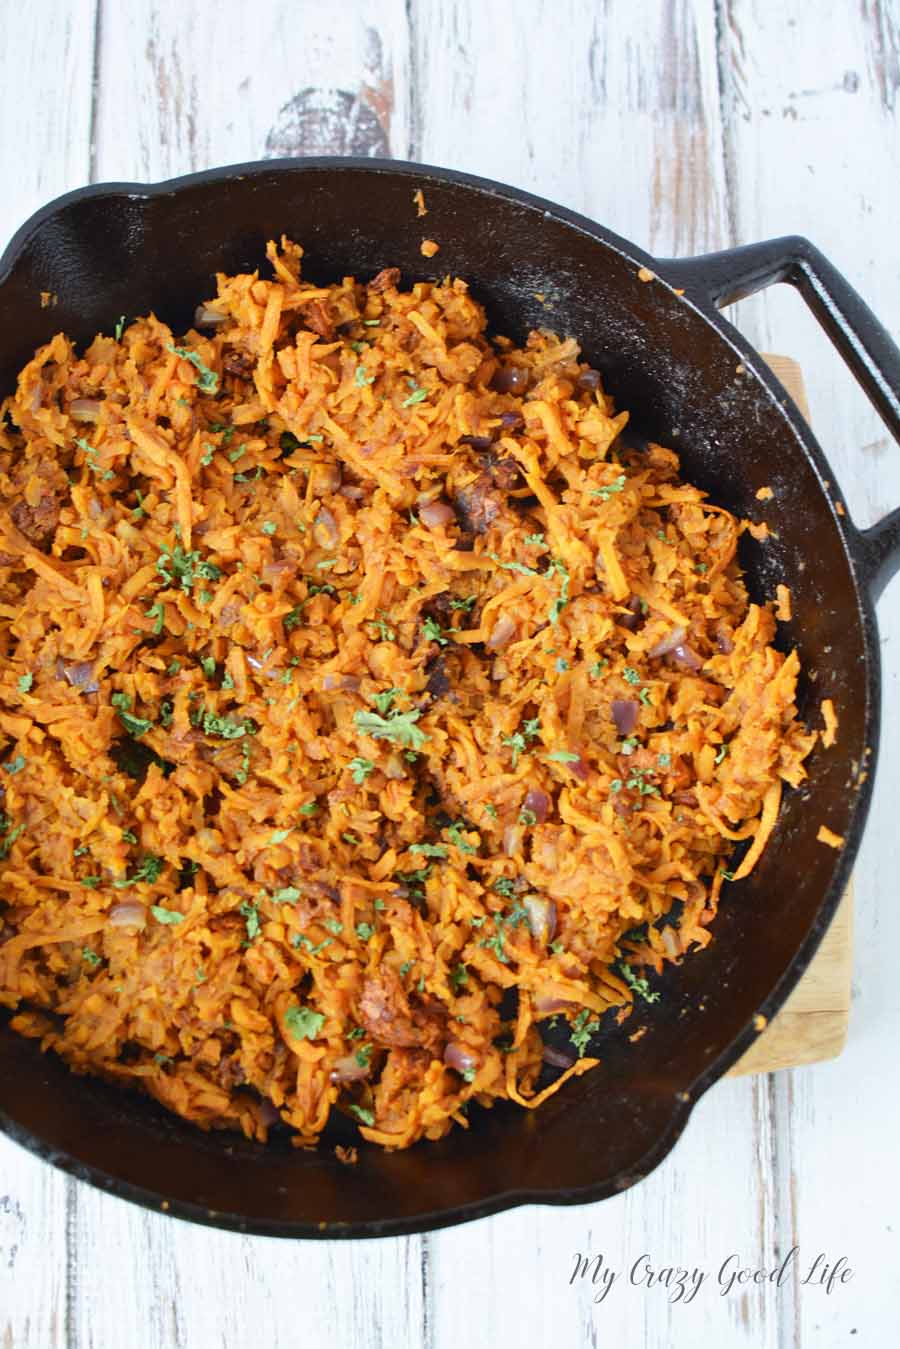 This sweet potato hash is so tasty and easy to make. If you are looking for a delicious recipe that the whole family will love, this is the one! #21dayfix #21dfx #recipes #21dayfixrecipes #breakfast #healthyeats 